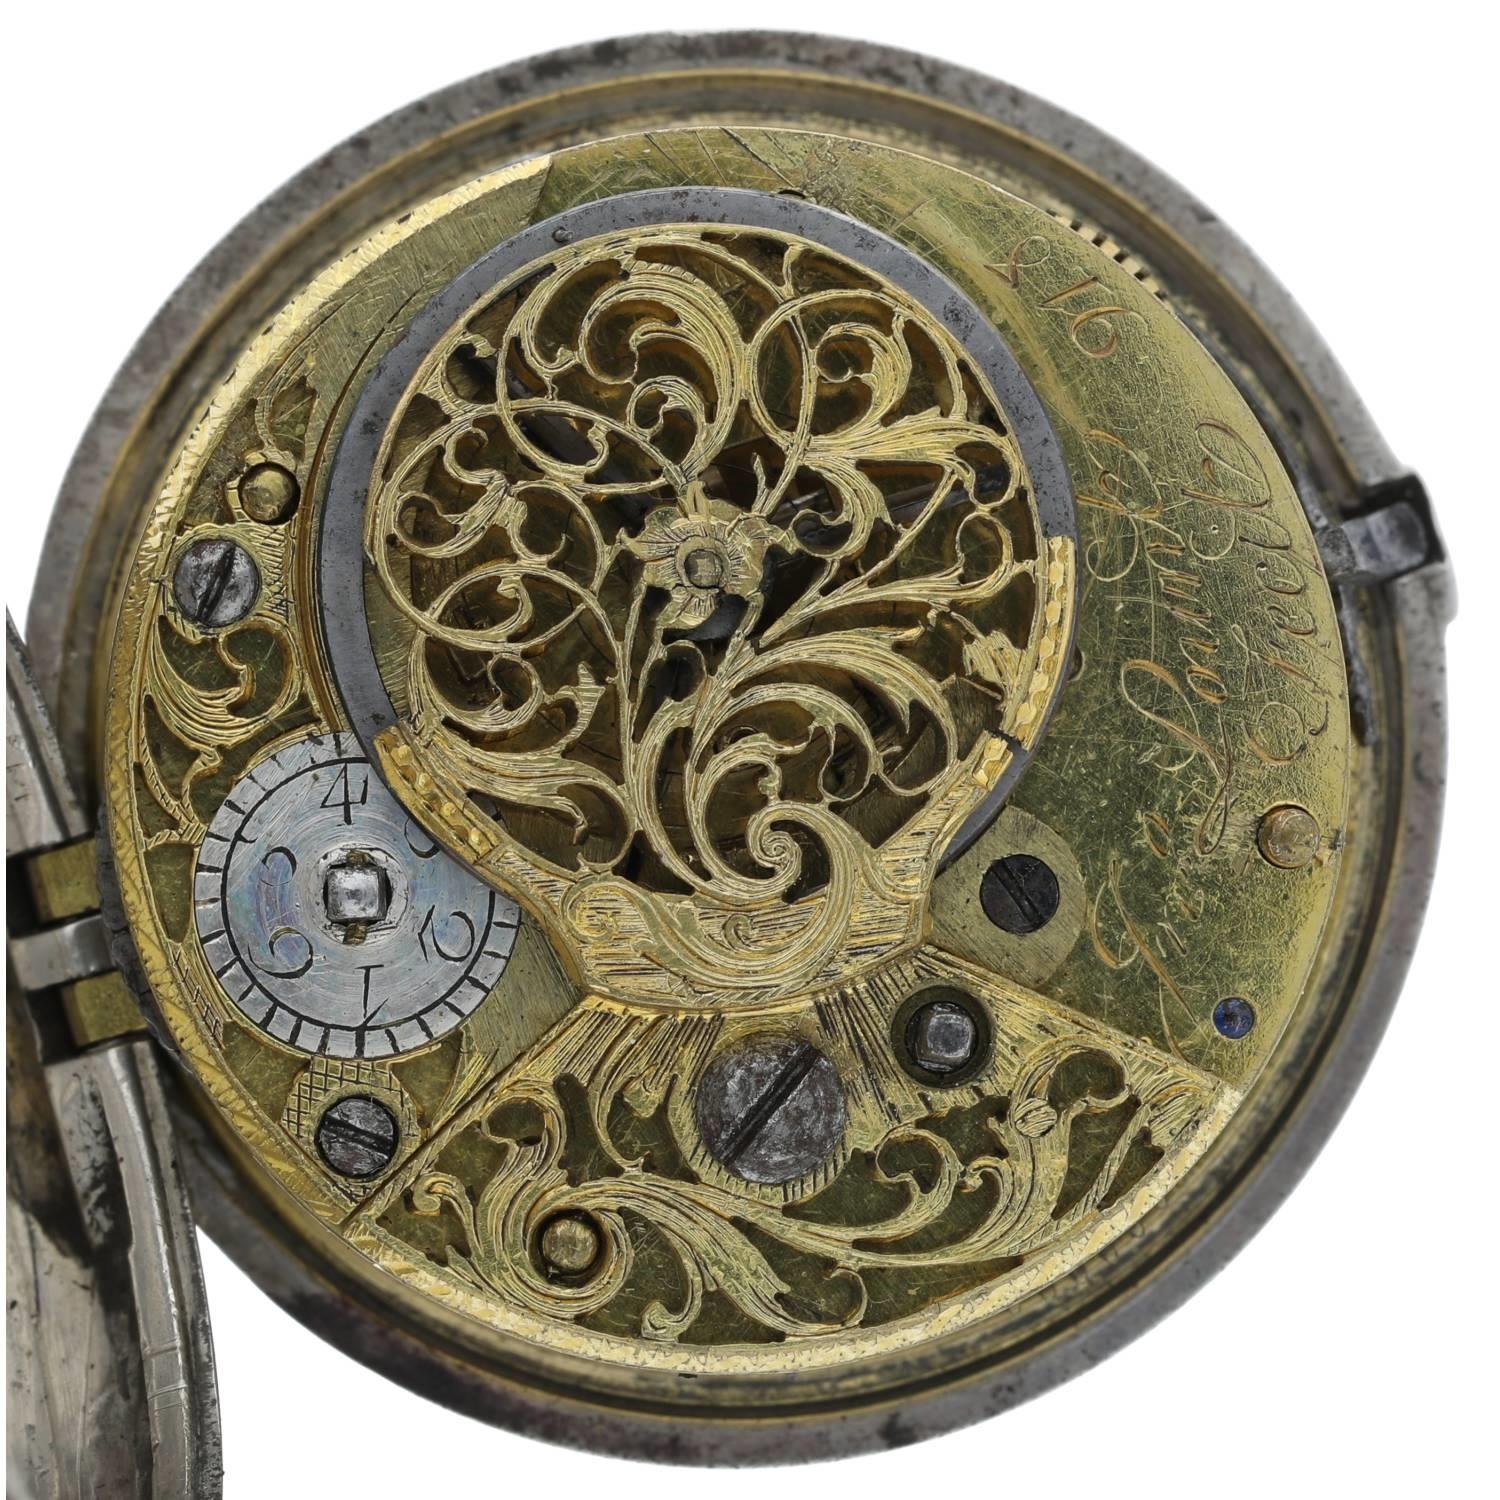 Jno. Lownt, Fecit - George III English silver pair cased verge pocket watch, London 1769, signed - Image 4 of 10